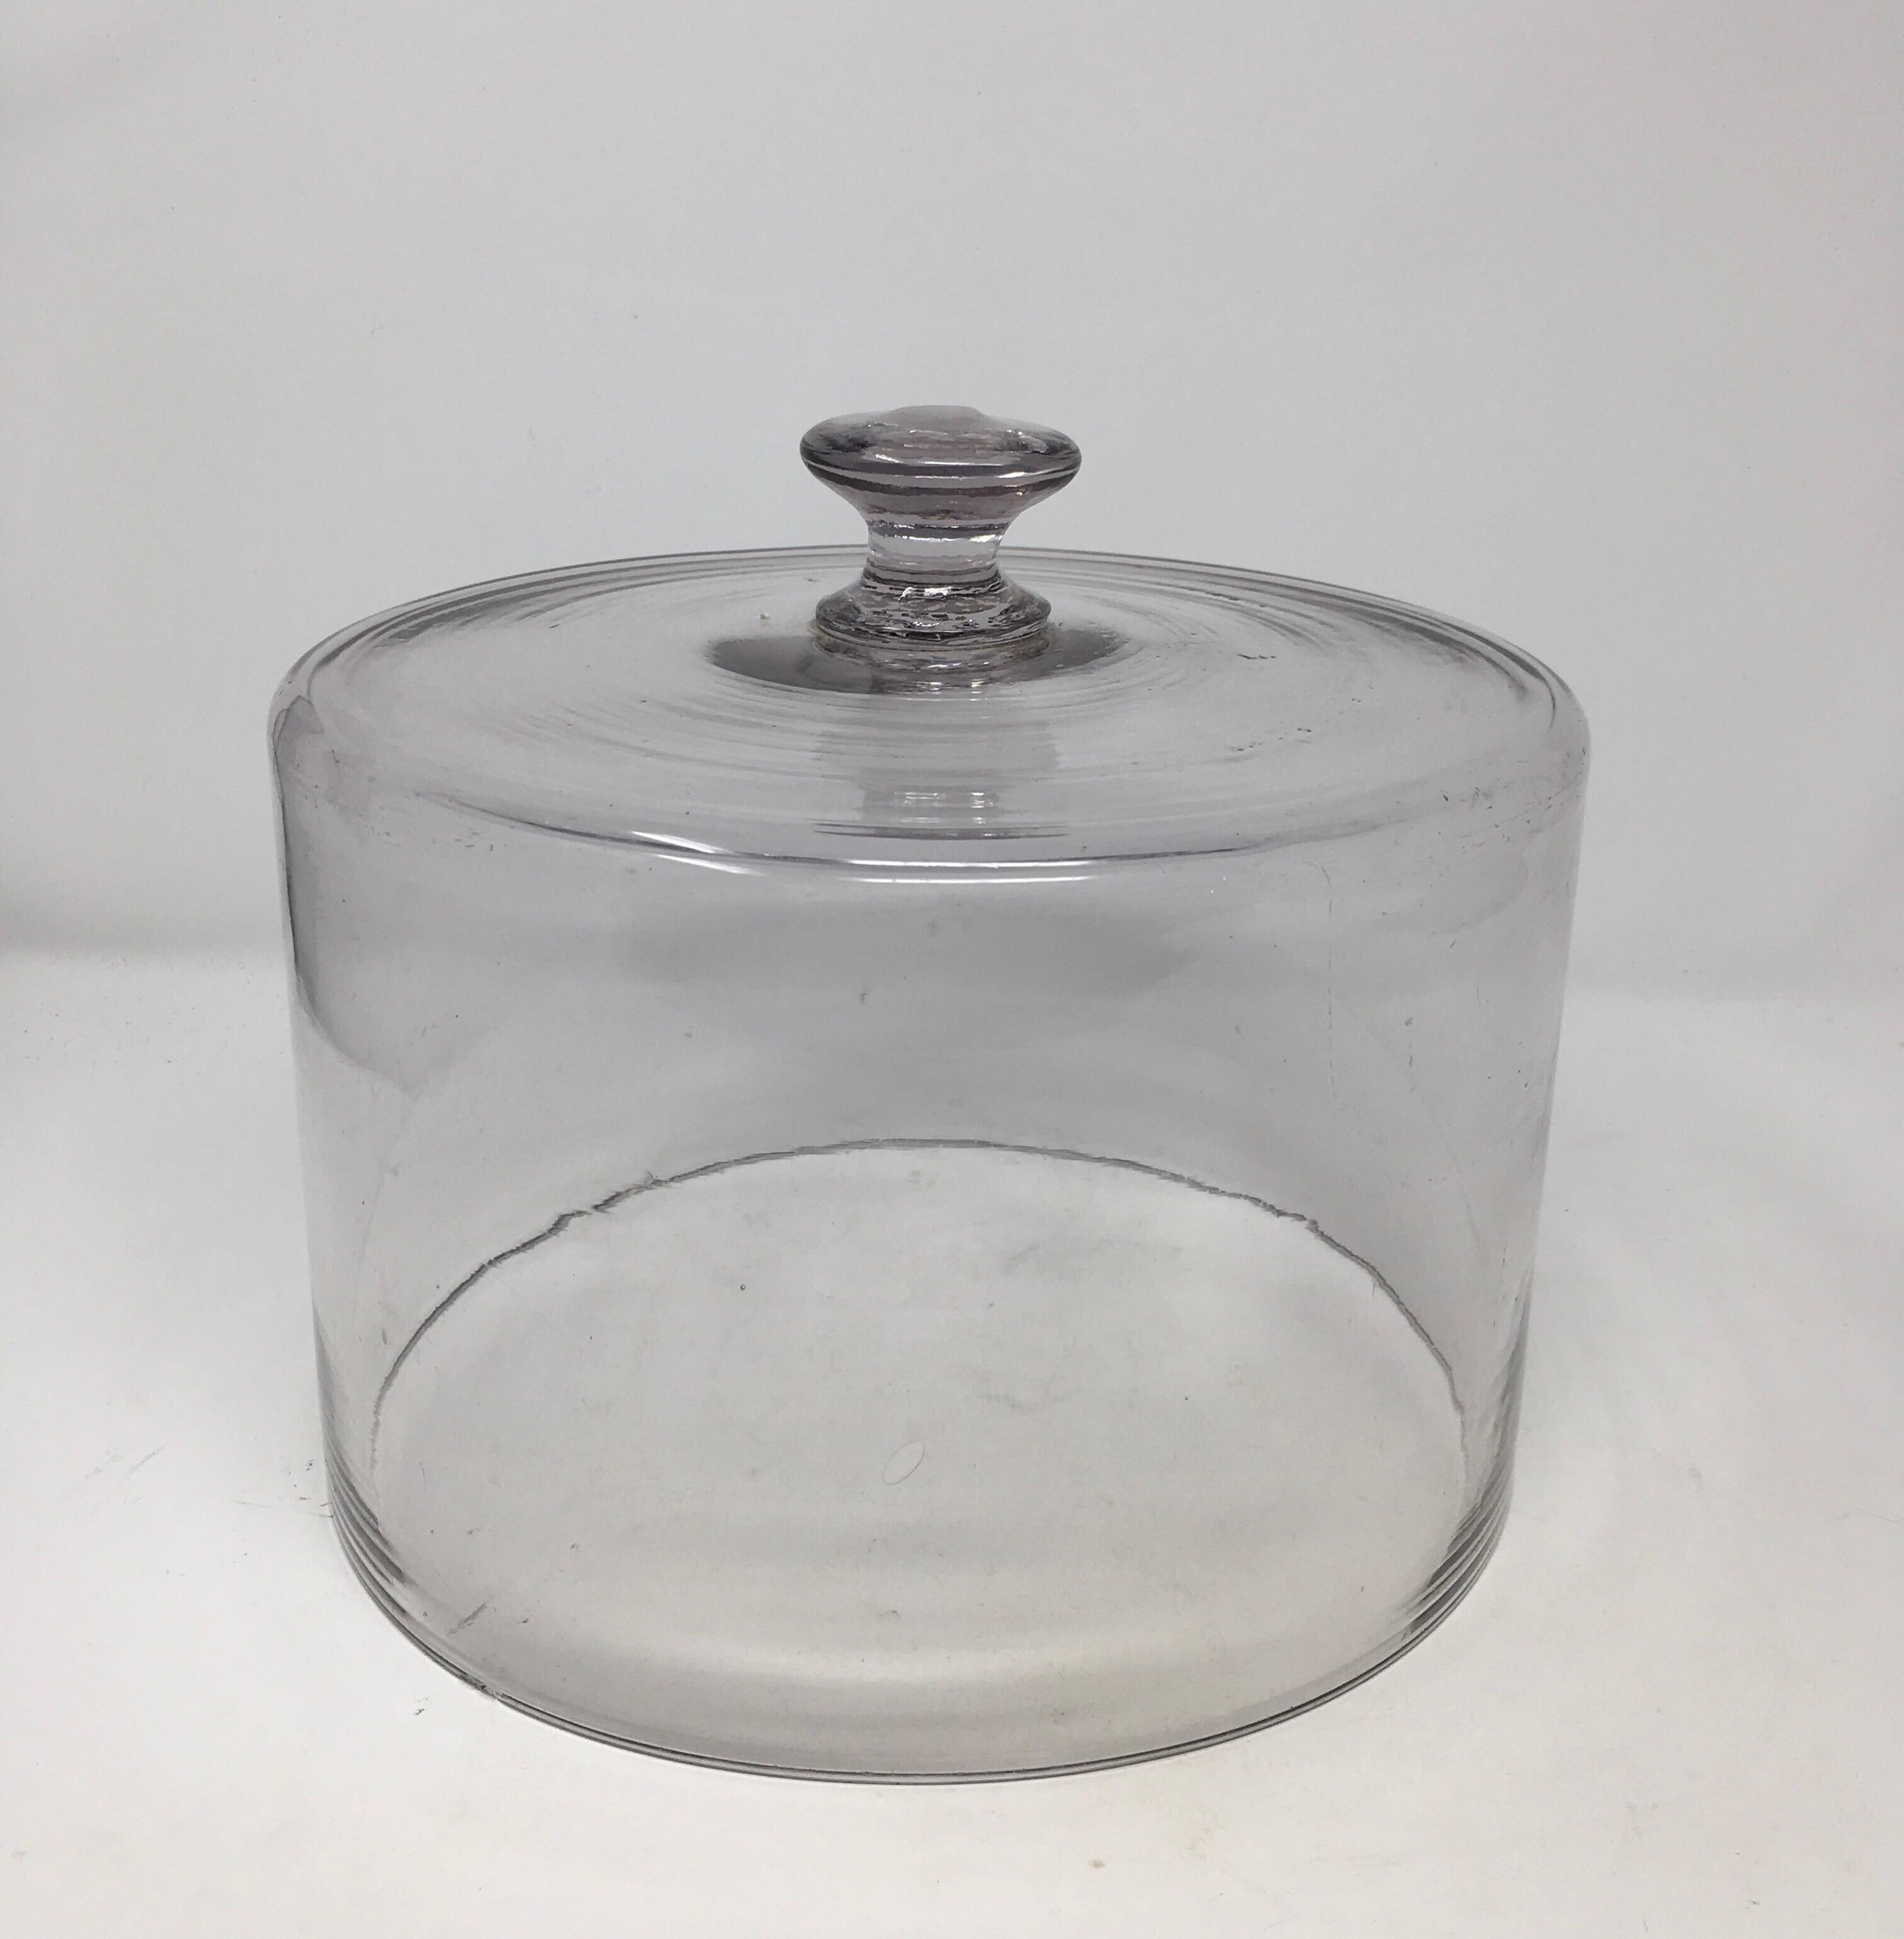 Found in France, this hand blown glass cheese or pastry cloche is topped with a solid glass handle/knob. This charming hand blown dome has many bubbles and irregularities. Very decorative, could be used to cover food or plants.